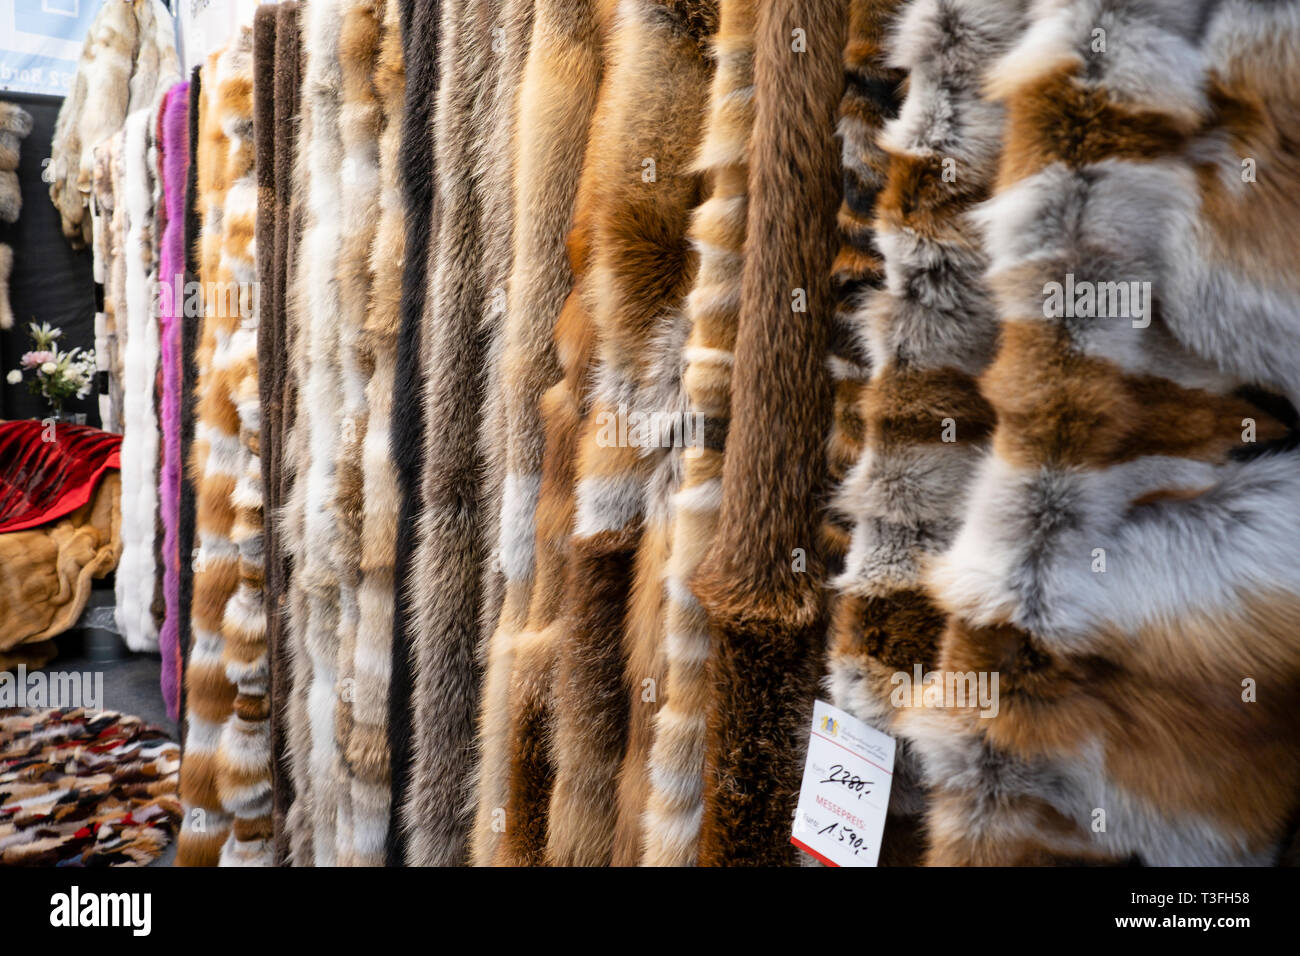 05 April 2019, Schleswig-Holstein, Neumünster: Real fur blankets hanging  from a sales stand at the 